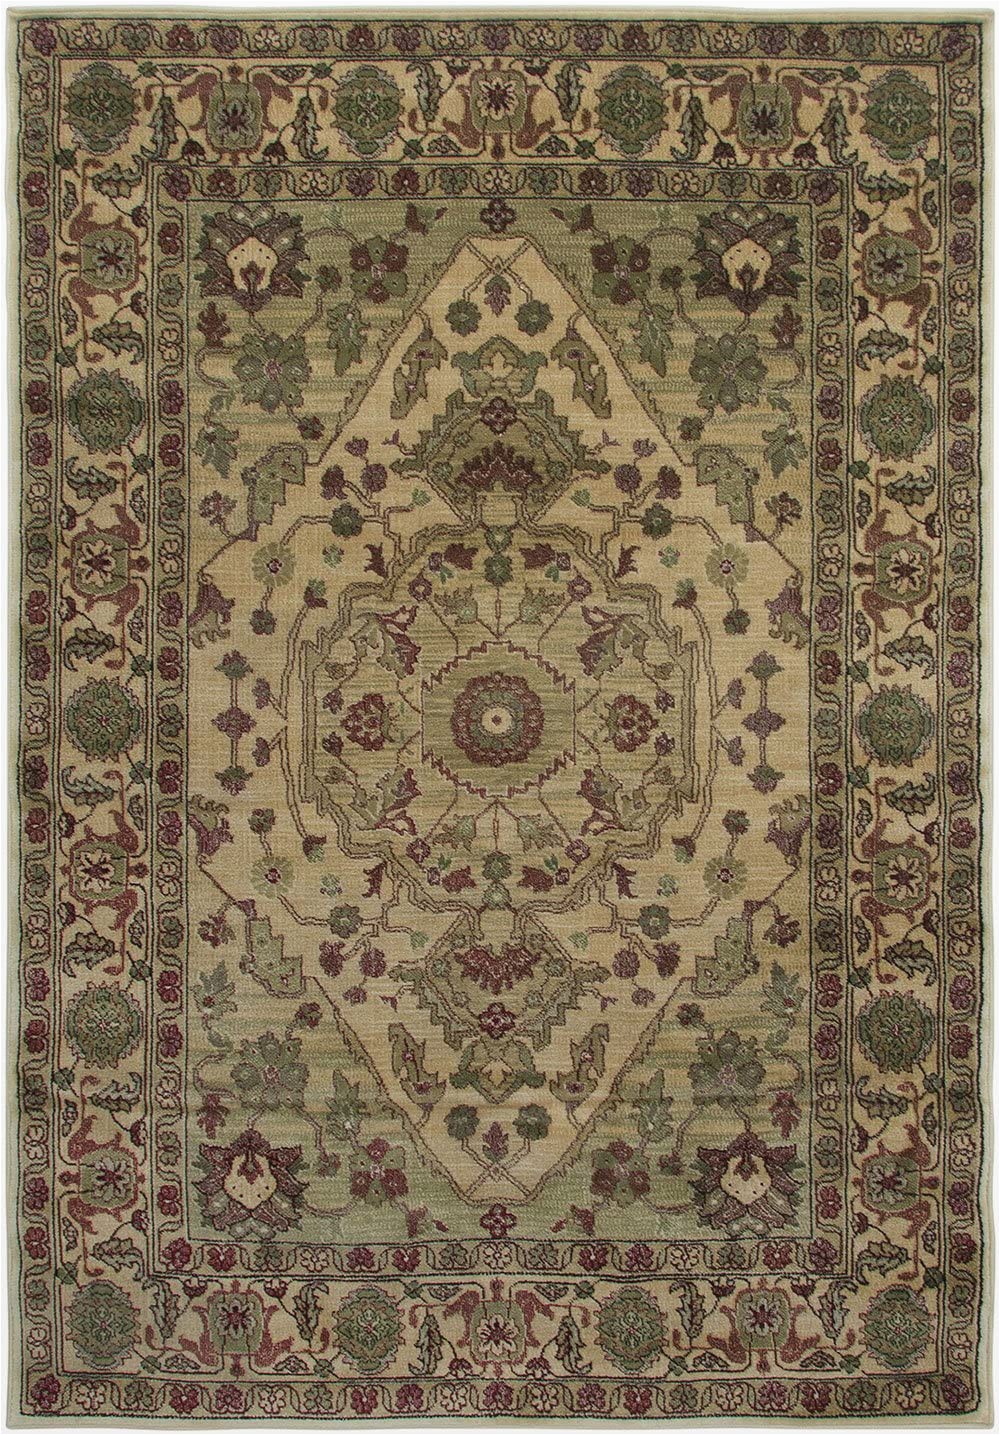 9 by 9 area Rug Amazon Rizzy Home so3336 sorrento 6 Feet 7 Inch by 9